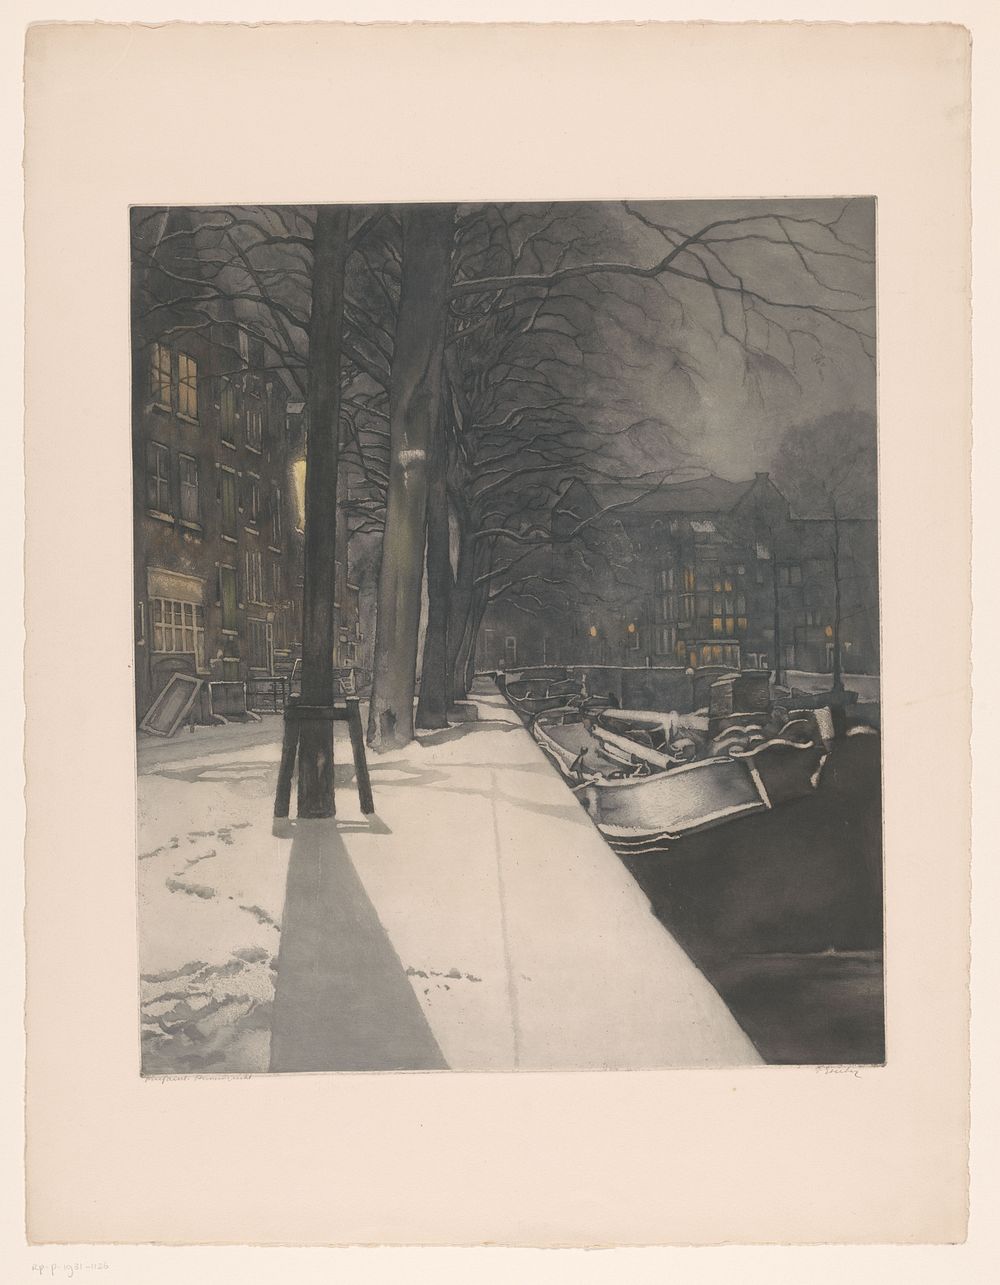 Prinsengracht (1887 - 1931) by Frans Everbag